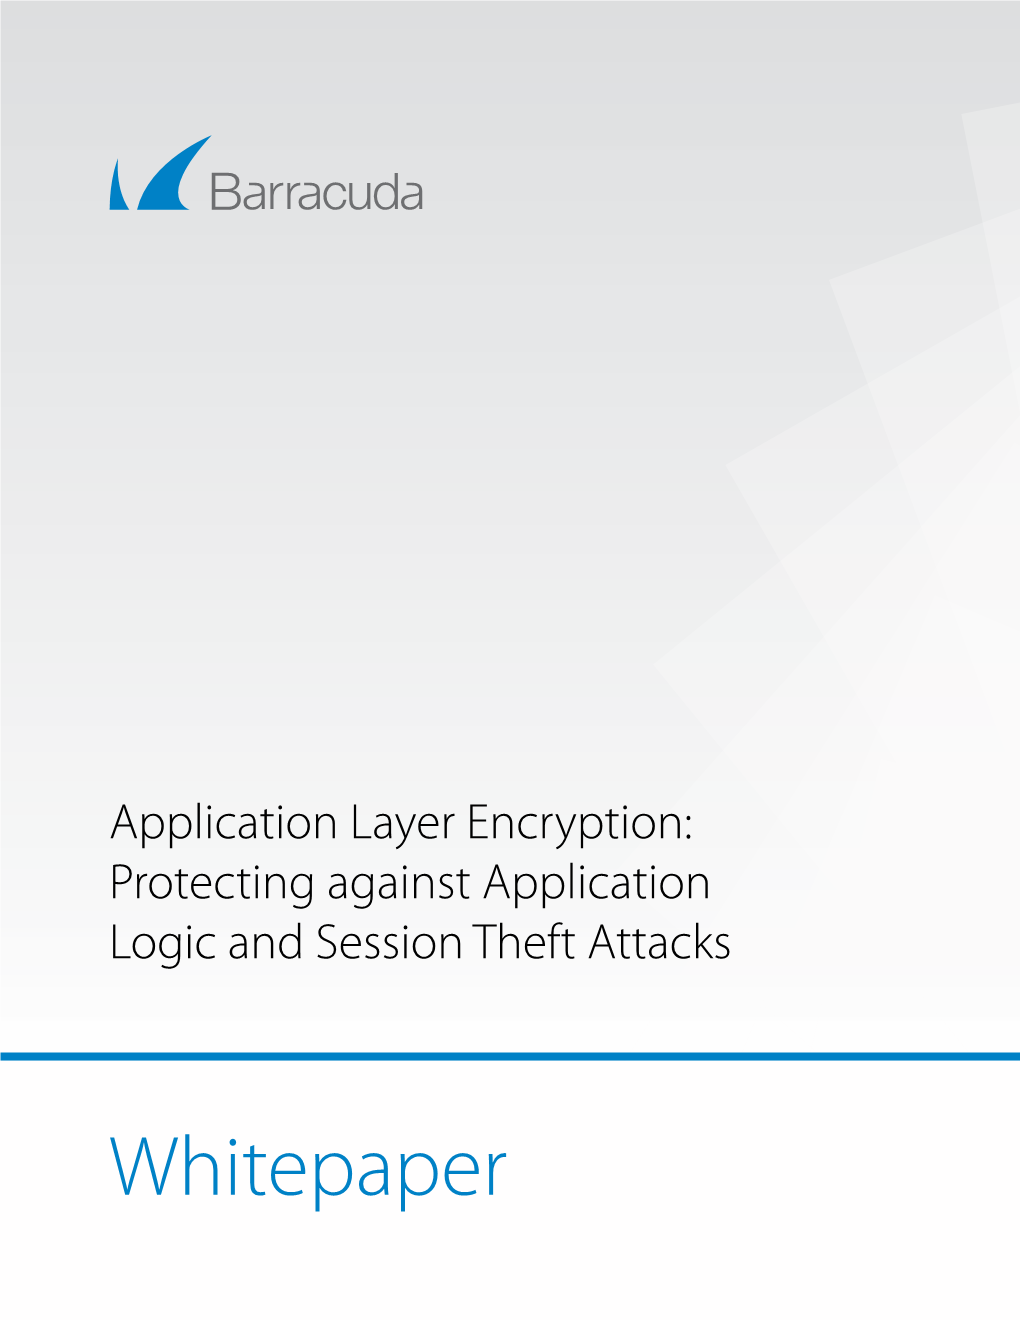 Barracuda • Application Layer Encryption: Protecting Against Application Logic and Session Theft Attacks